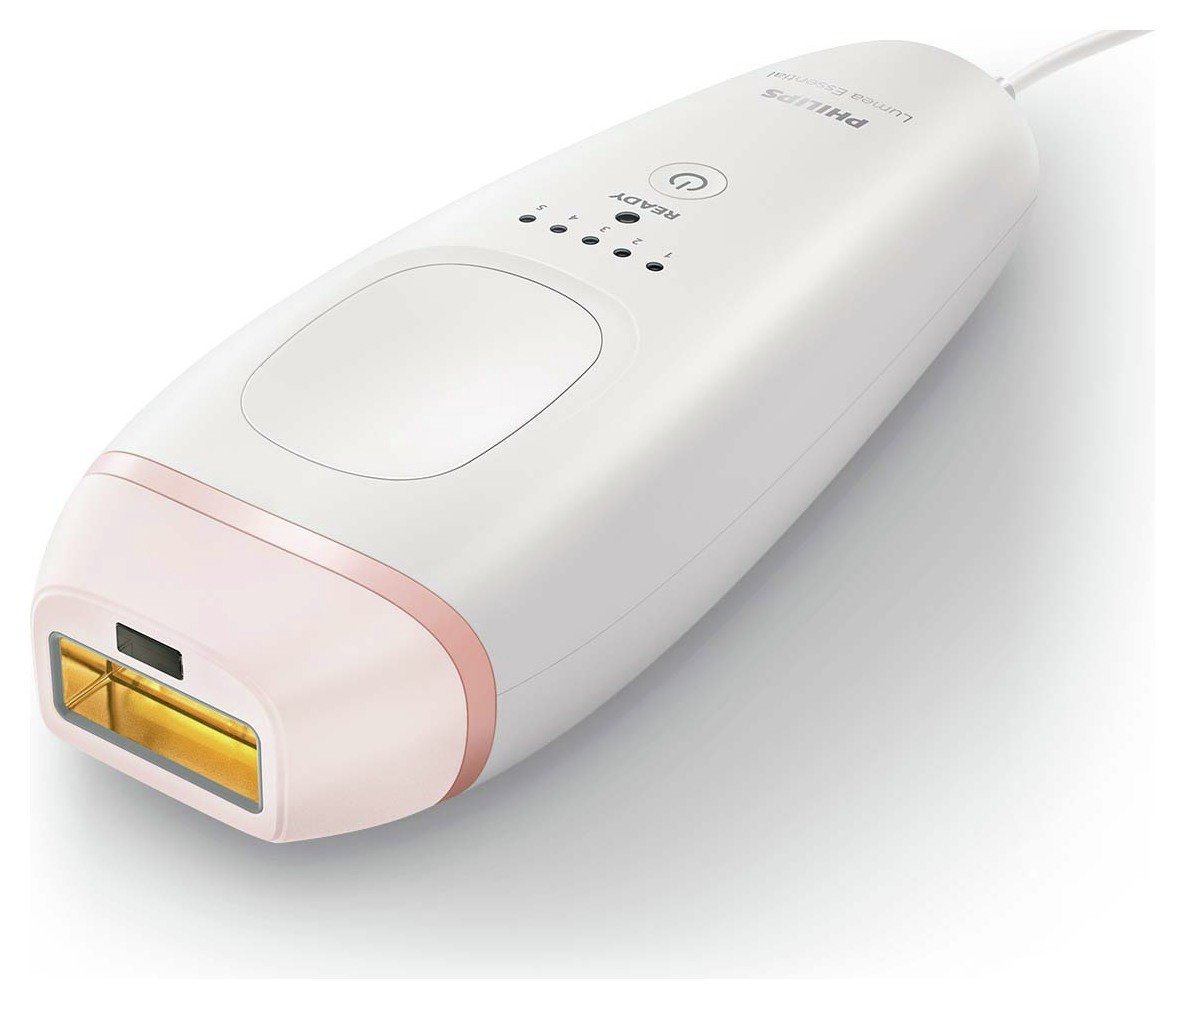 Philips Lumea BRI861 Corded IPL Hair Removal Device review